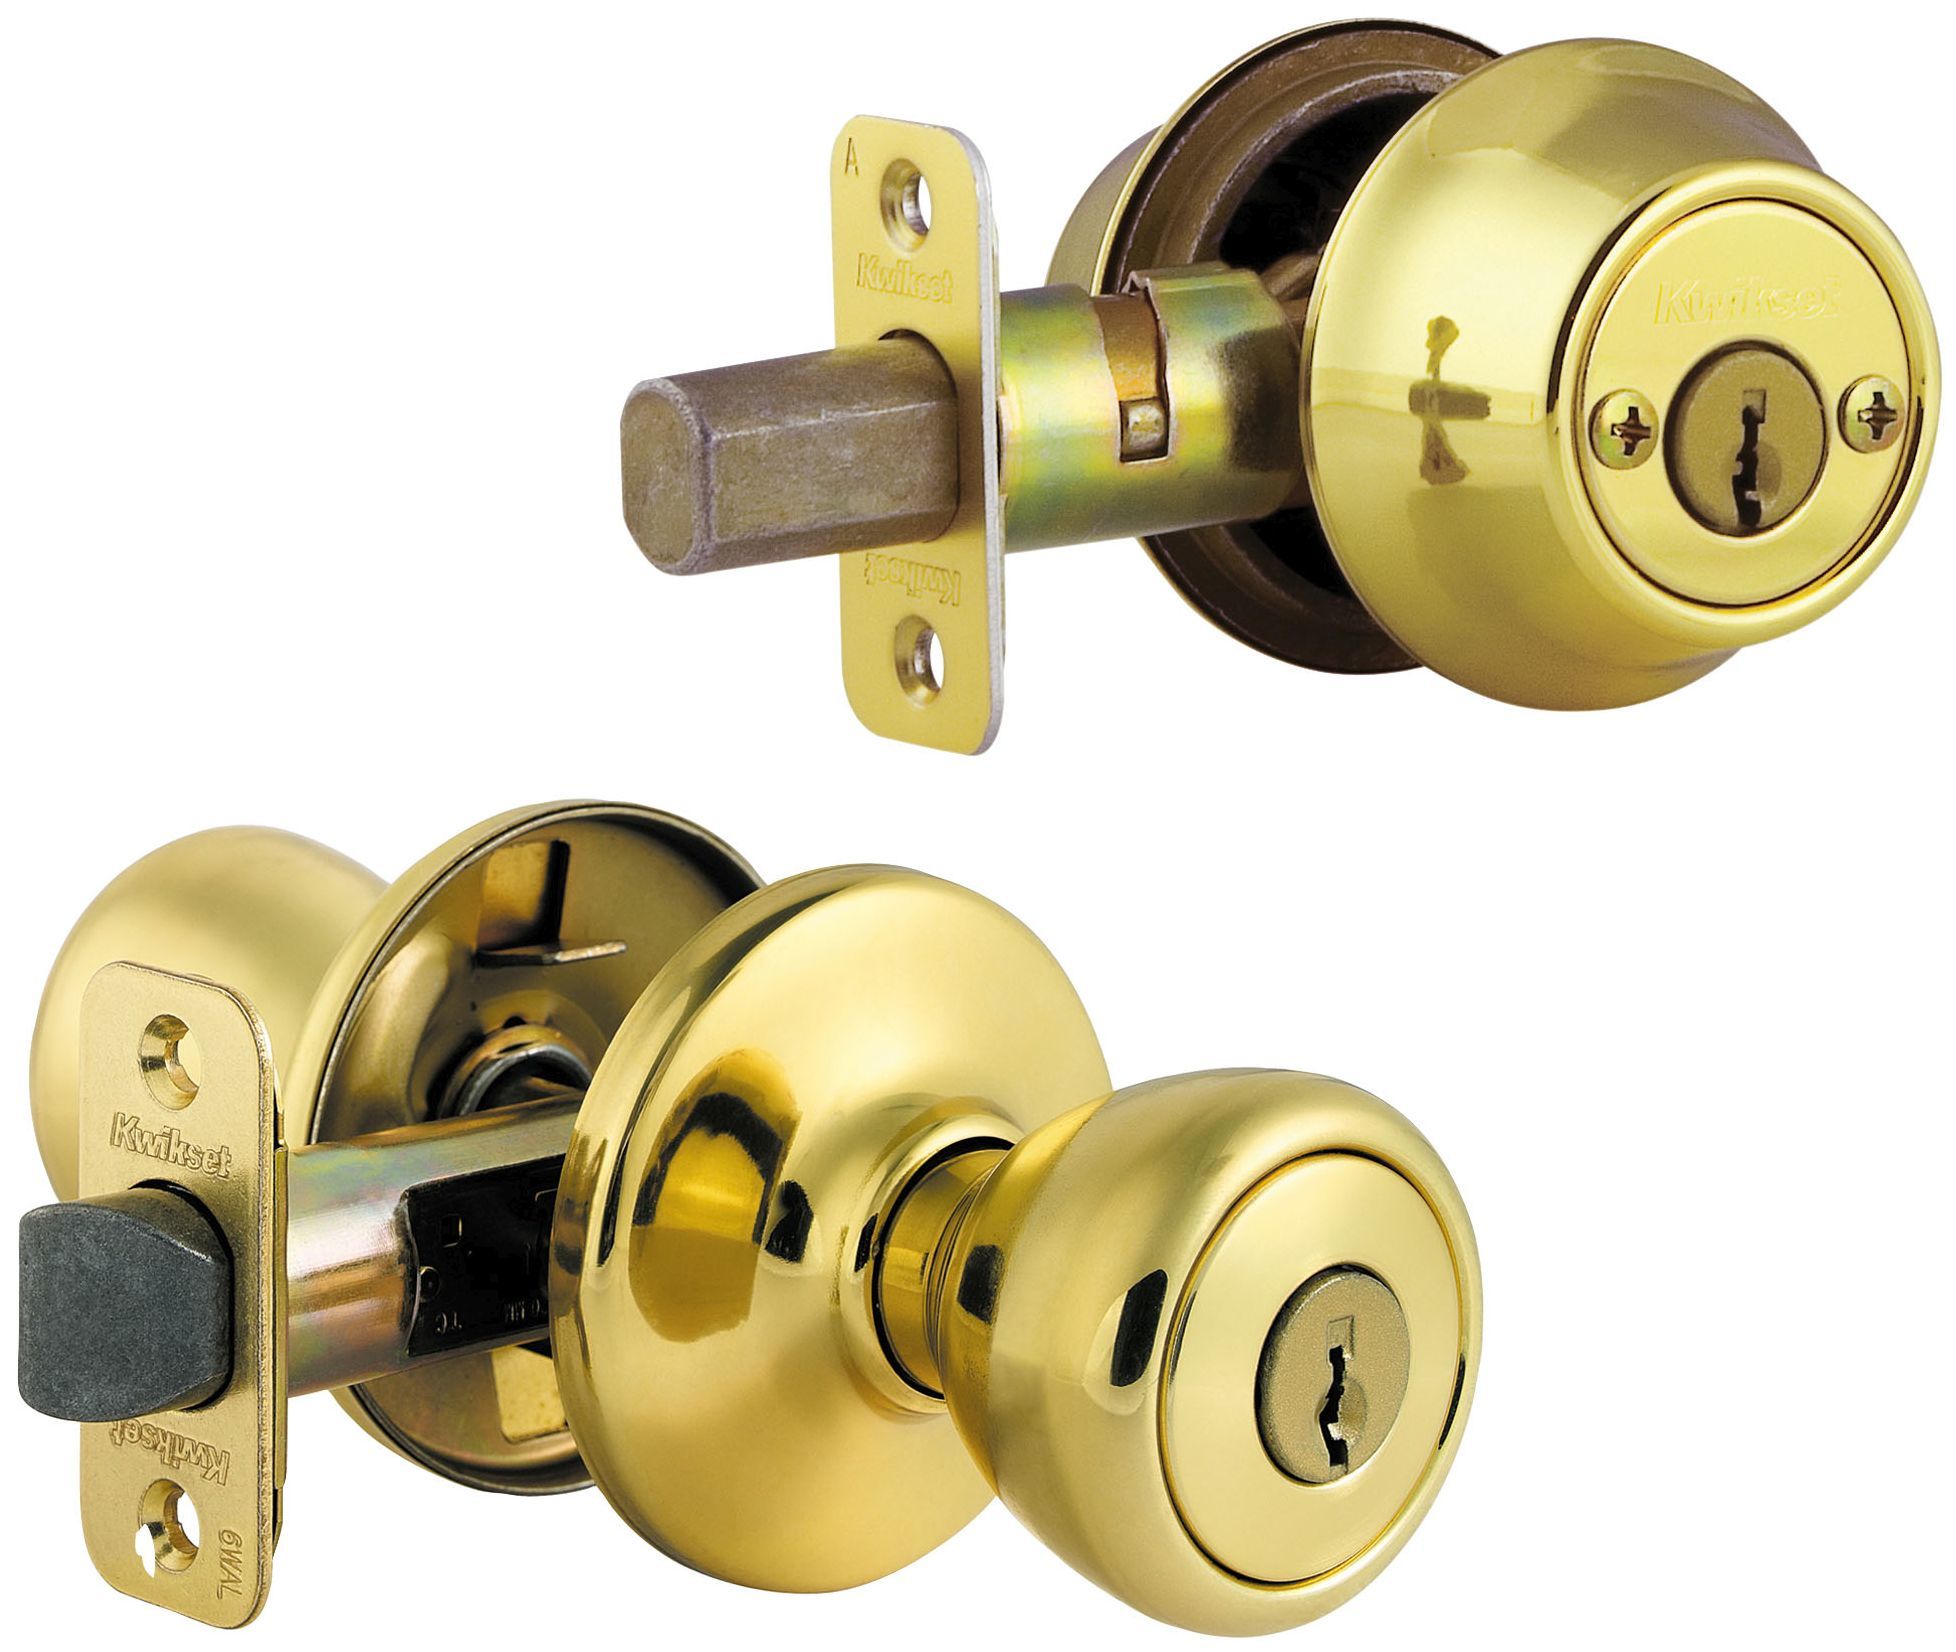 Kwikset 695 Tylo Entry Knob and Double Cylinder Deadbolt Combo Pack in Satin Chrome by Kwikset - 3